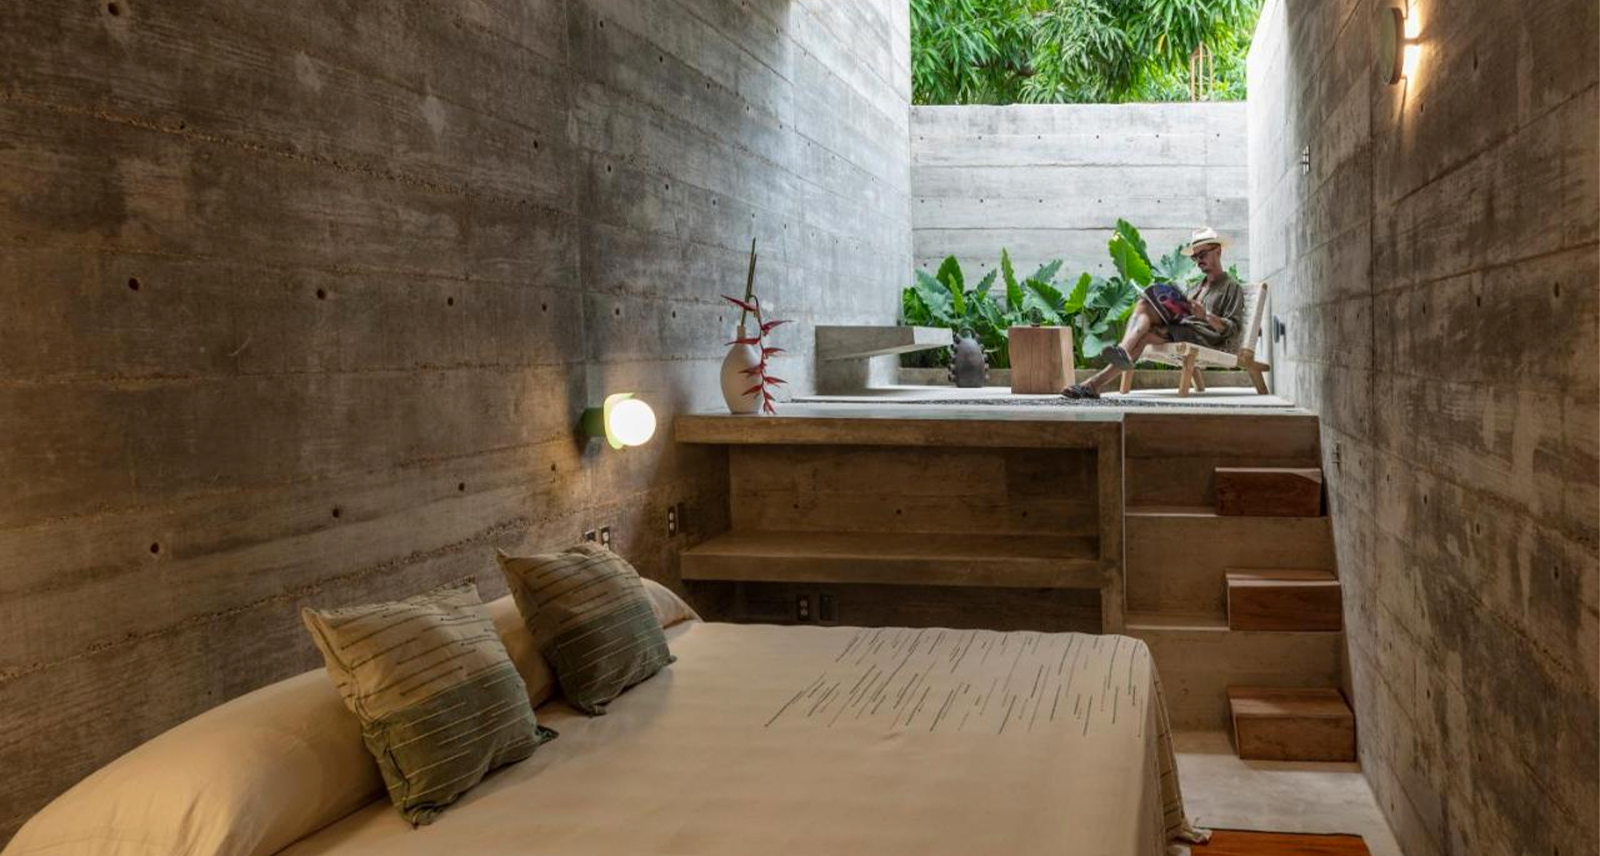 Book a stay in Mexico brutalist architecture through flighthub